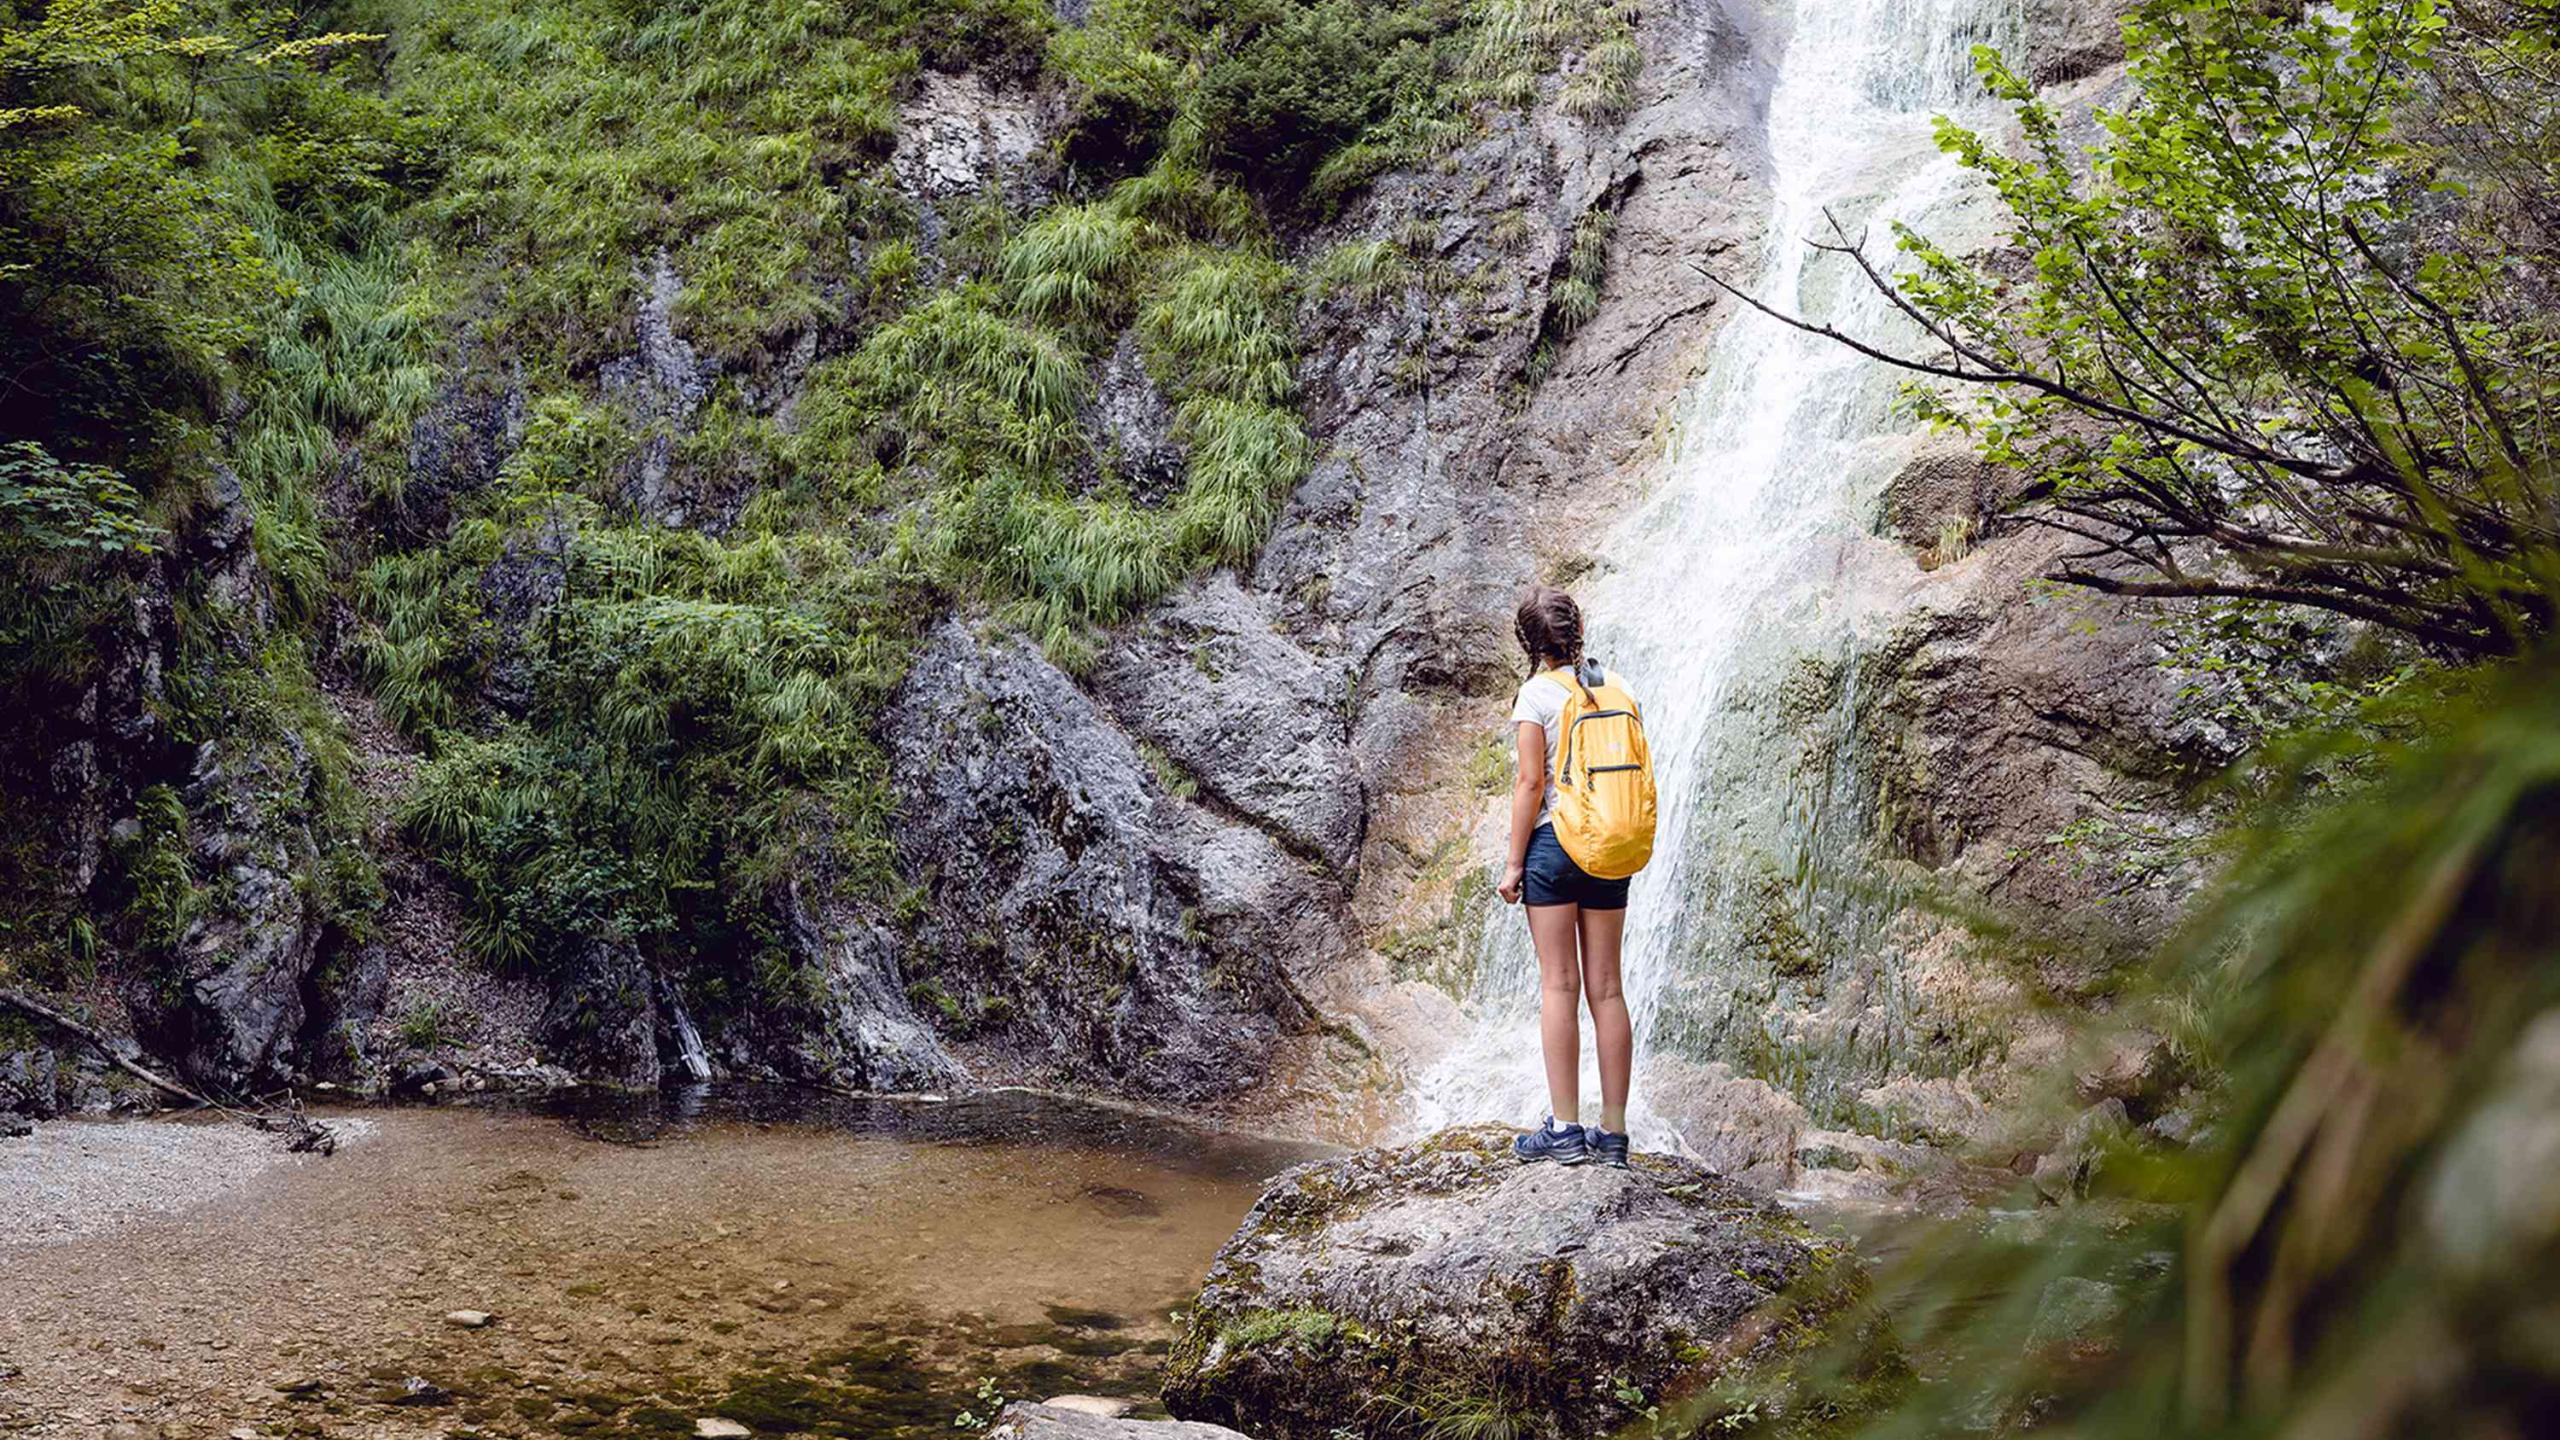 A woman stands on a rock in front of a waterfall